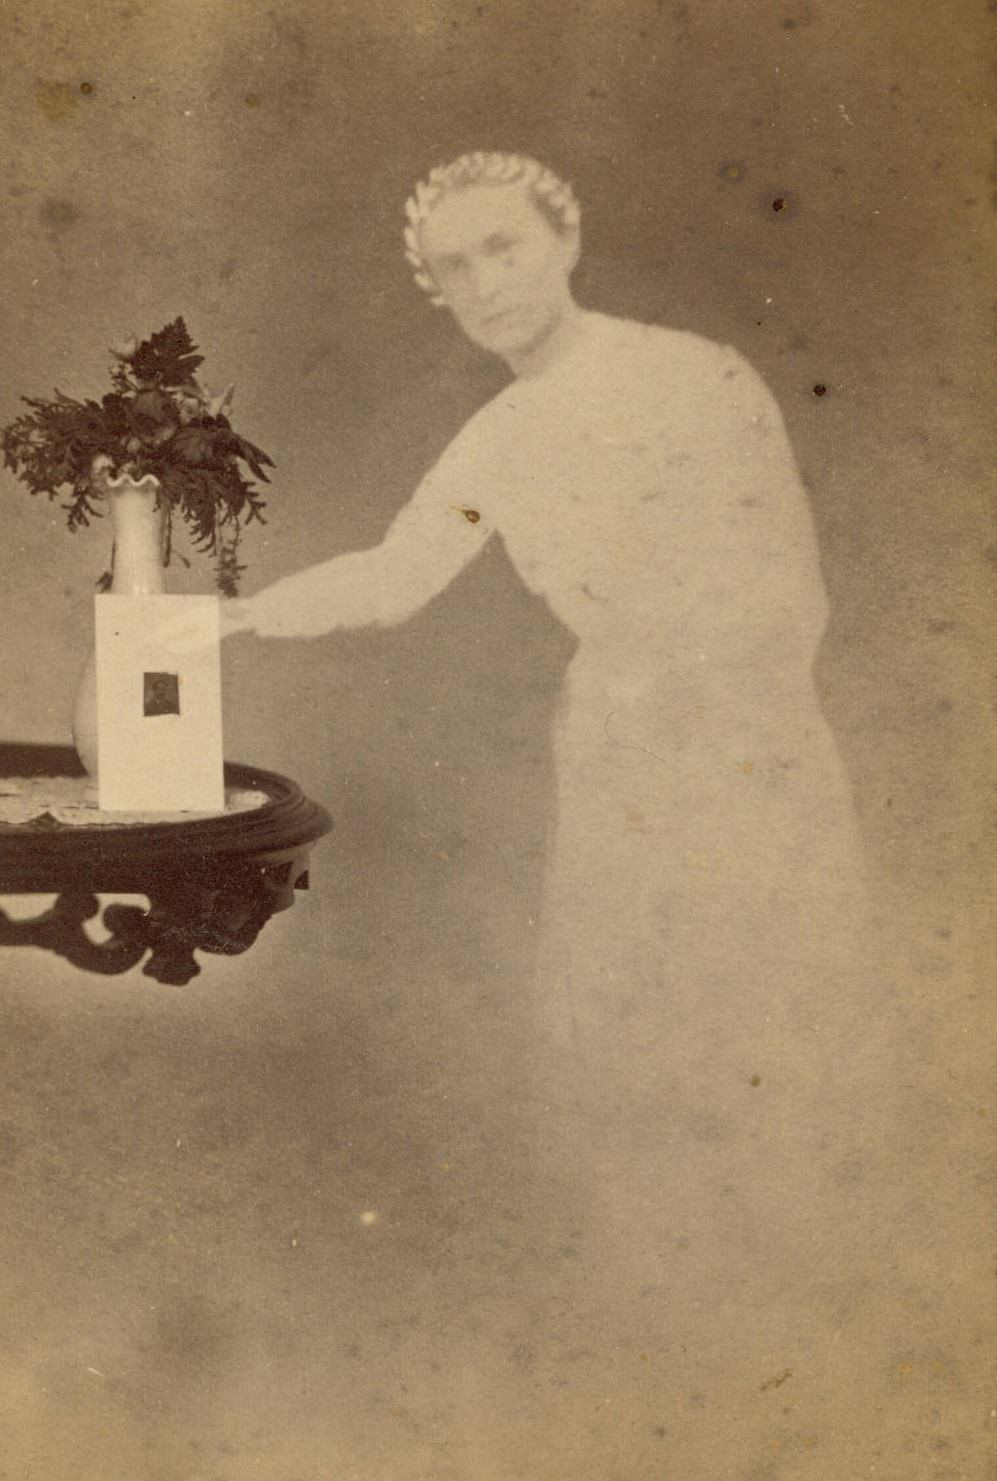 A photograph propped against a vase of flowers on a side table, with the faint image of a woman reaching out with one arm next to the table.